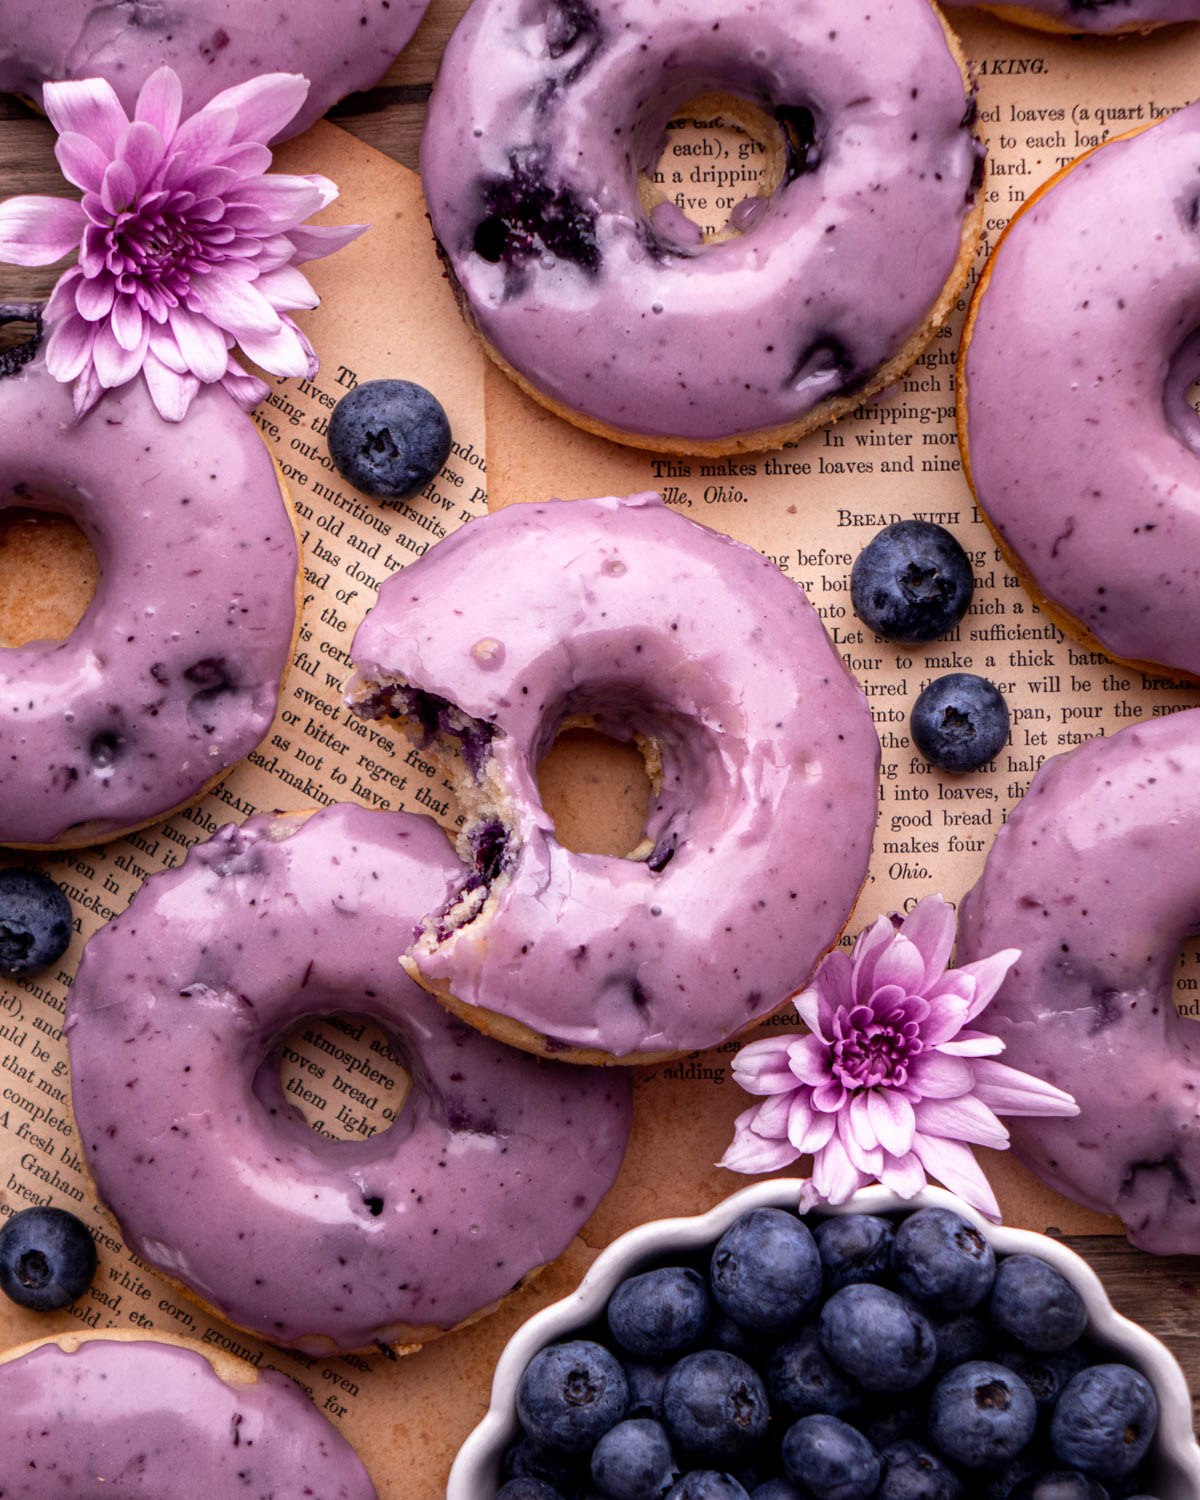 blueberry donuts laid on top of old book pages, one with a bite taken out, with bowl of blueberries and flowers